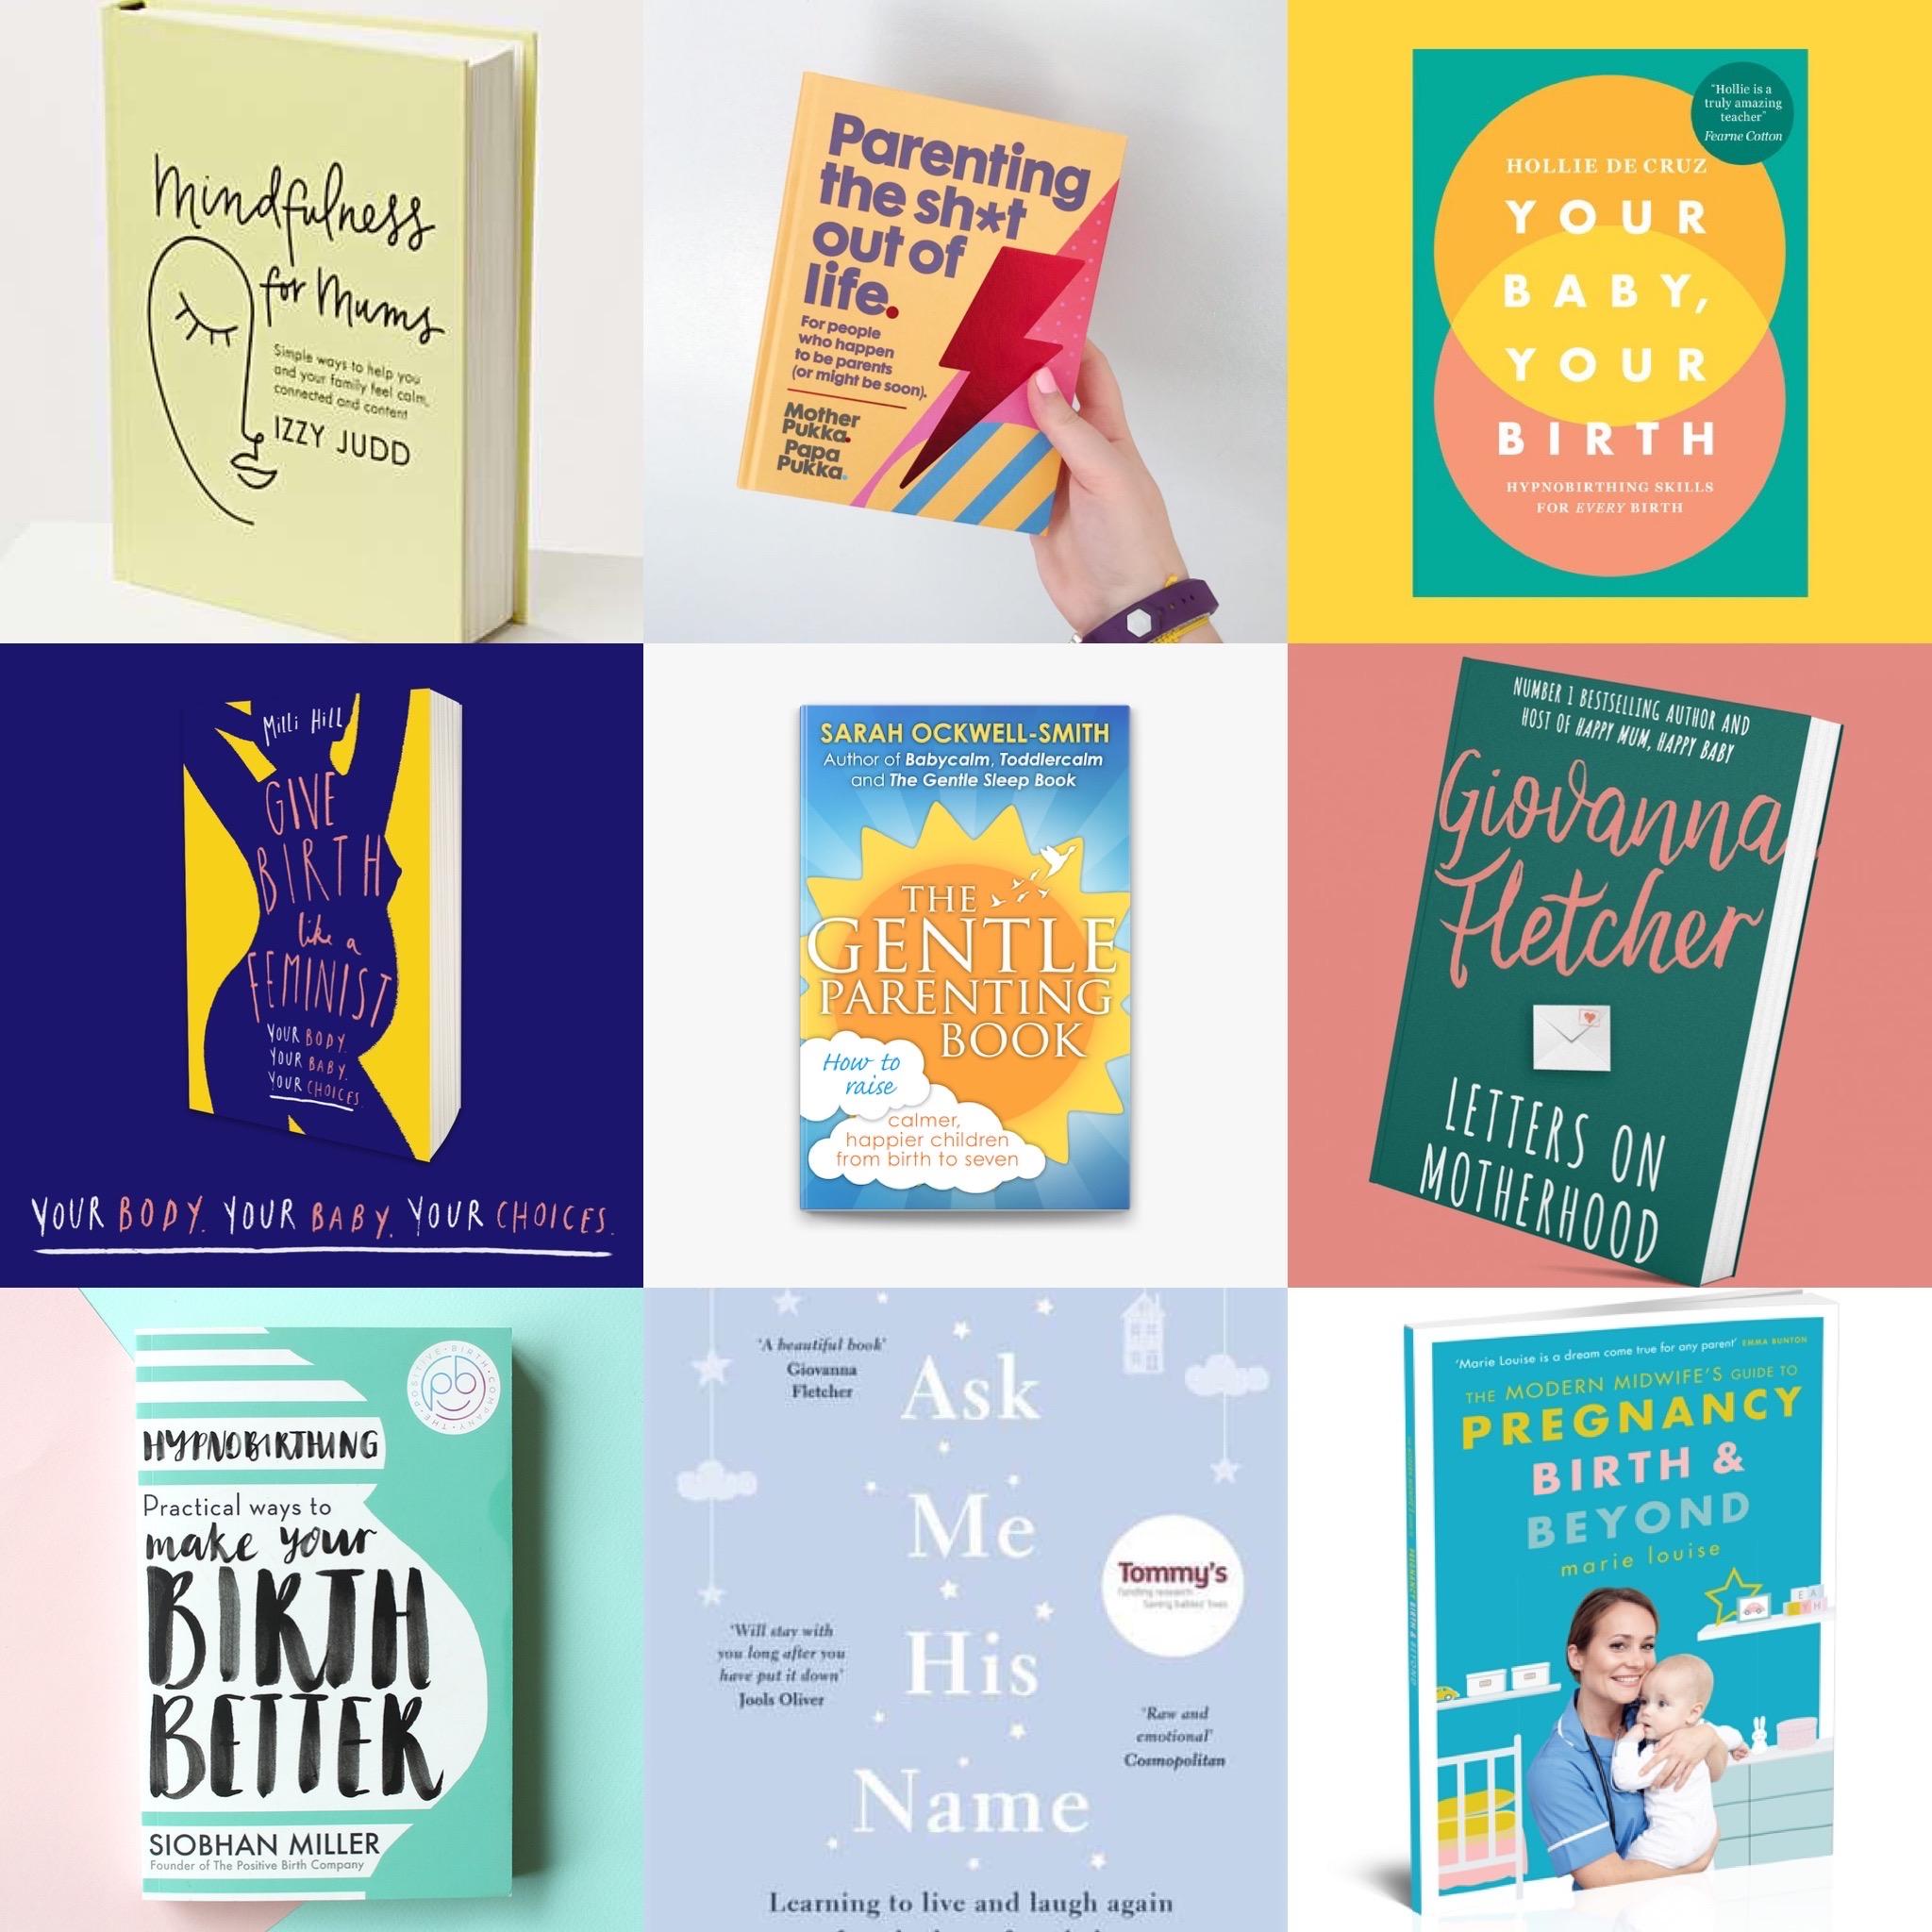 11 Best Pregnancy and Parenting books as voted by you! | Tommy's